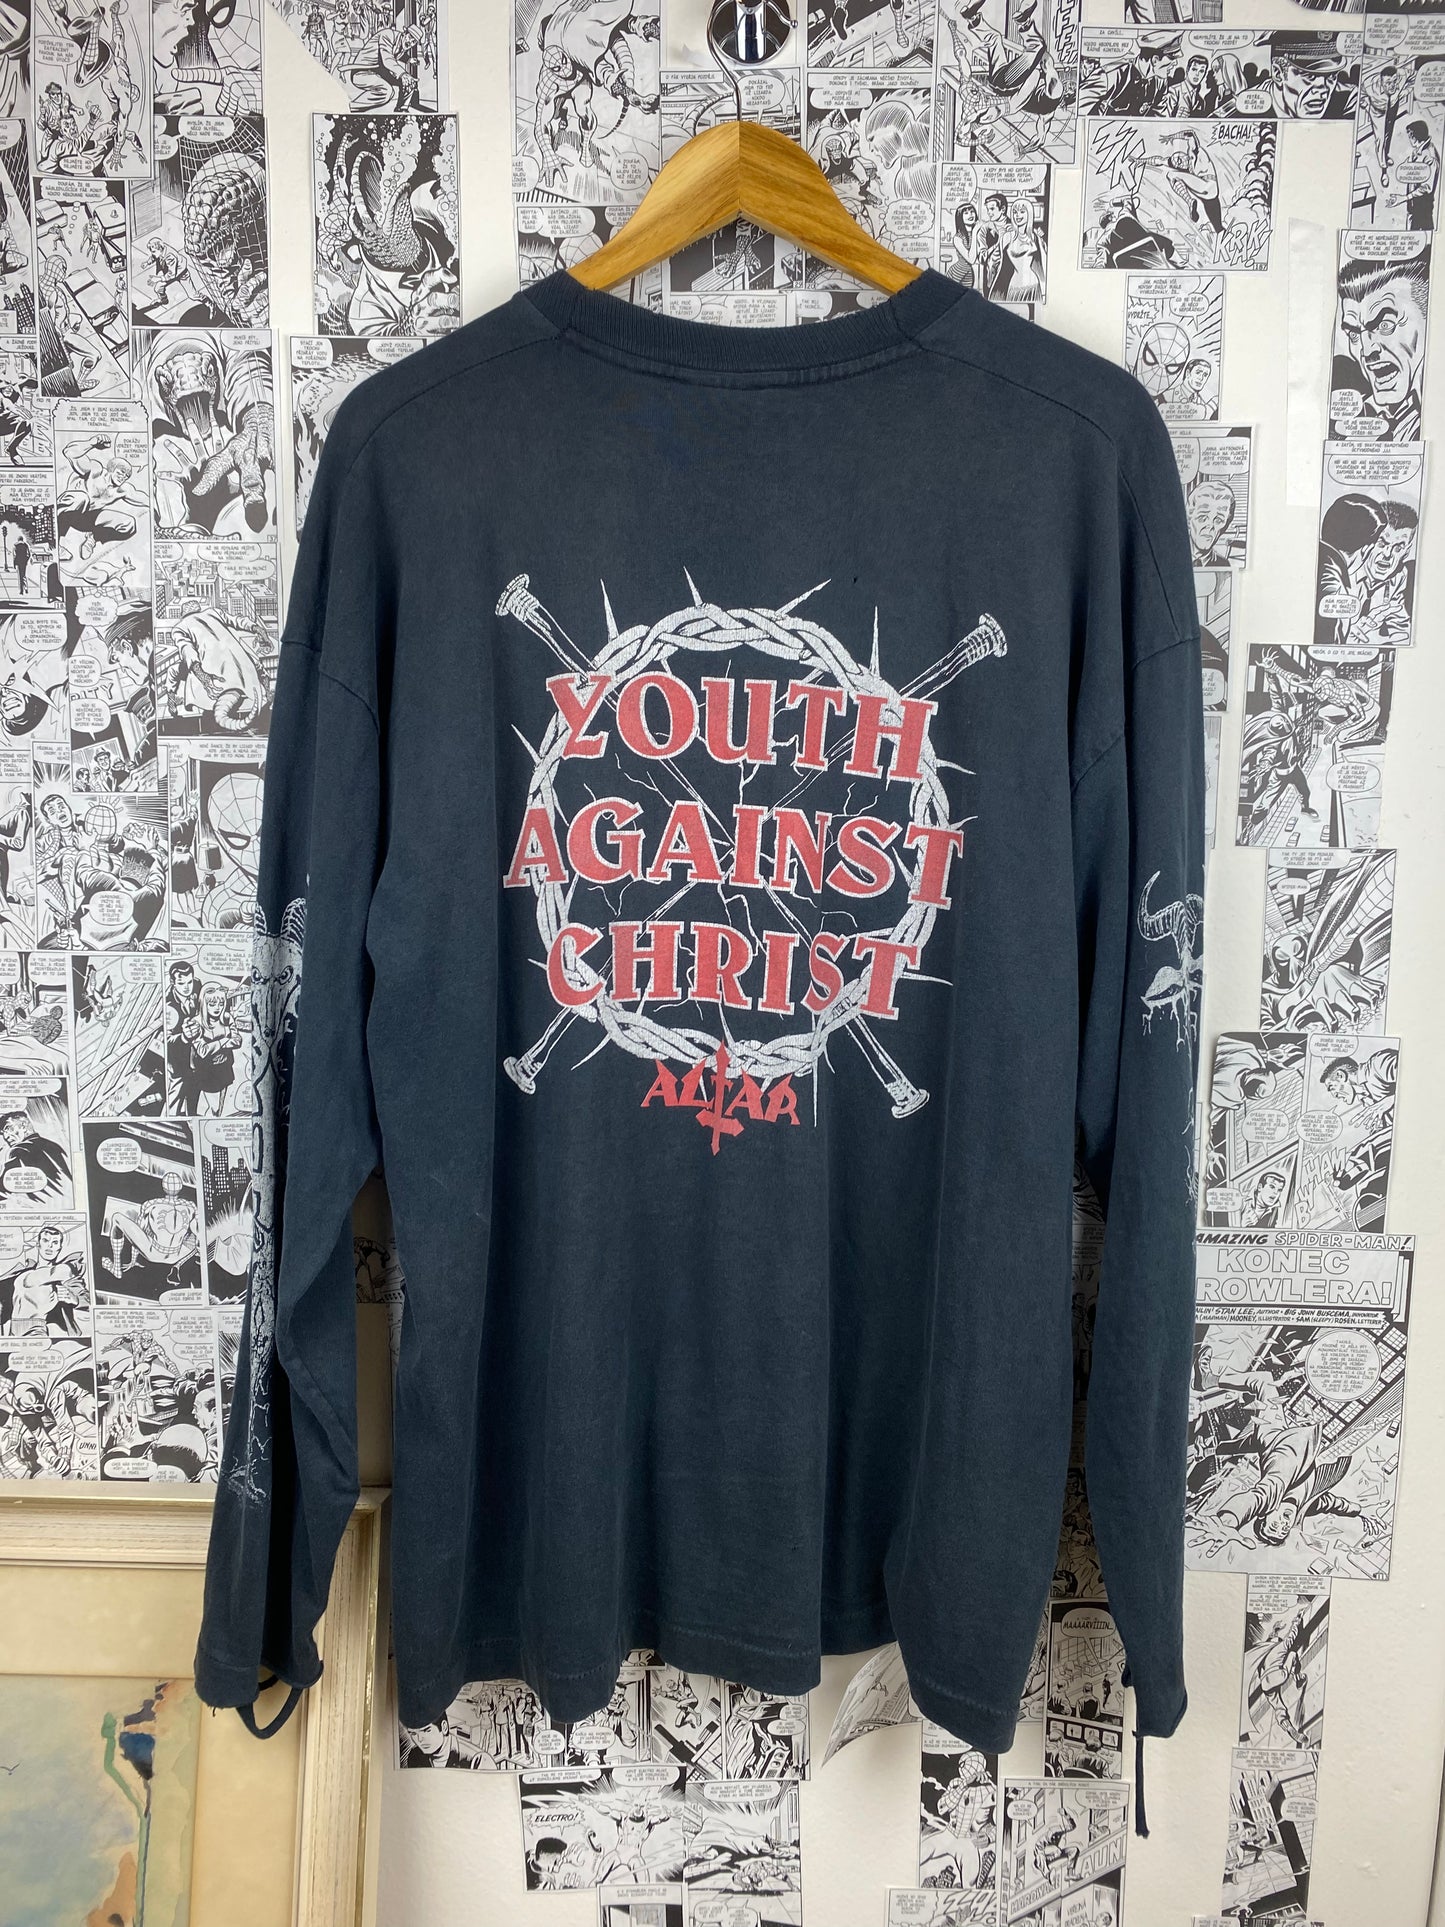 Vintage Altar “Youth Agains Christ” Distressed 1994 t-shirt - size XL